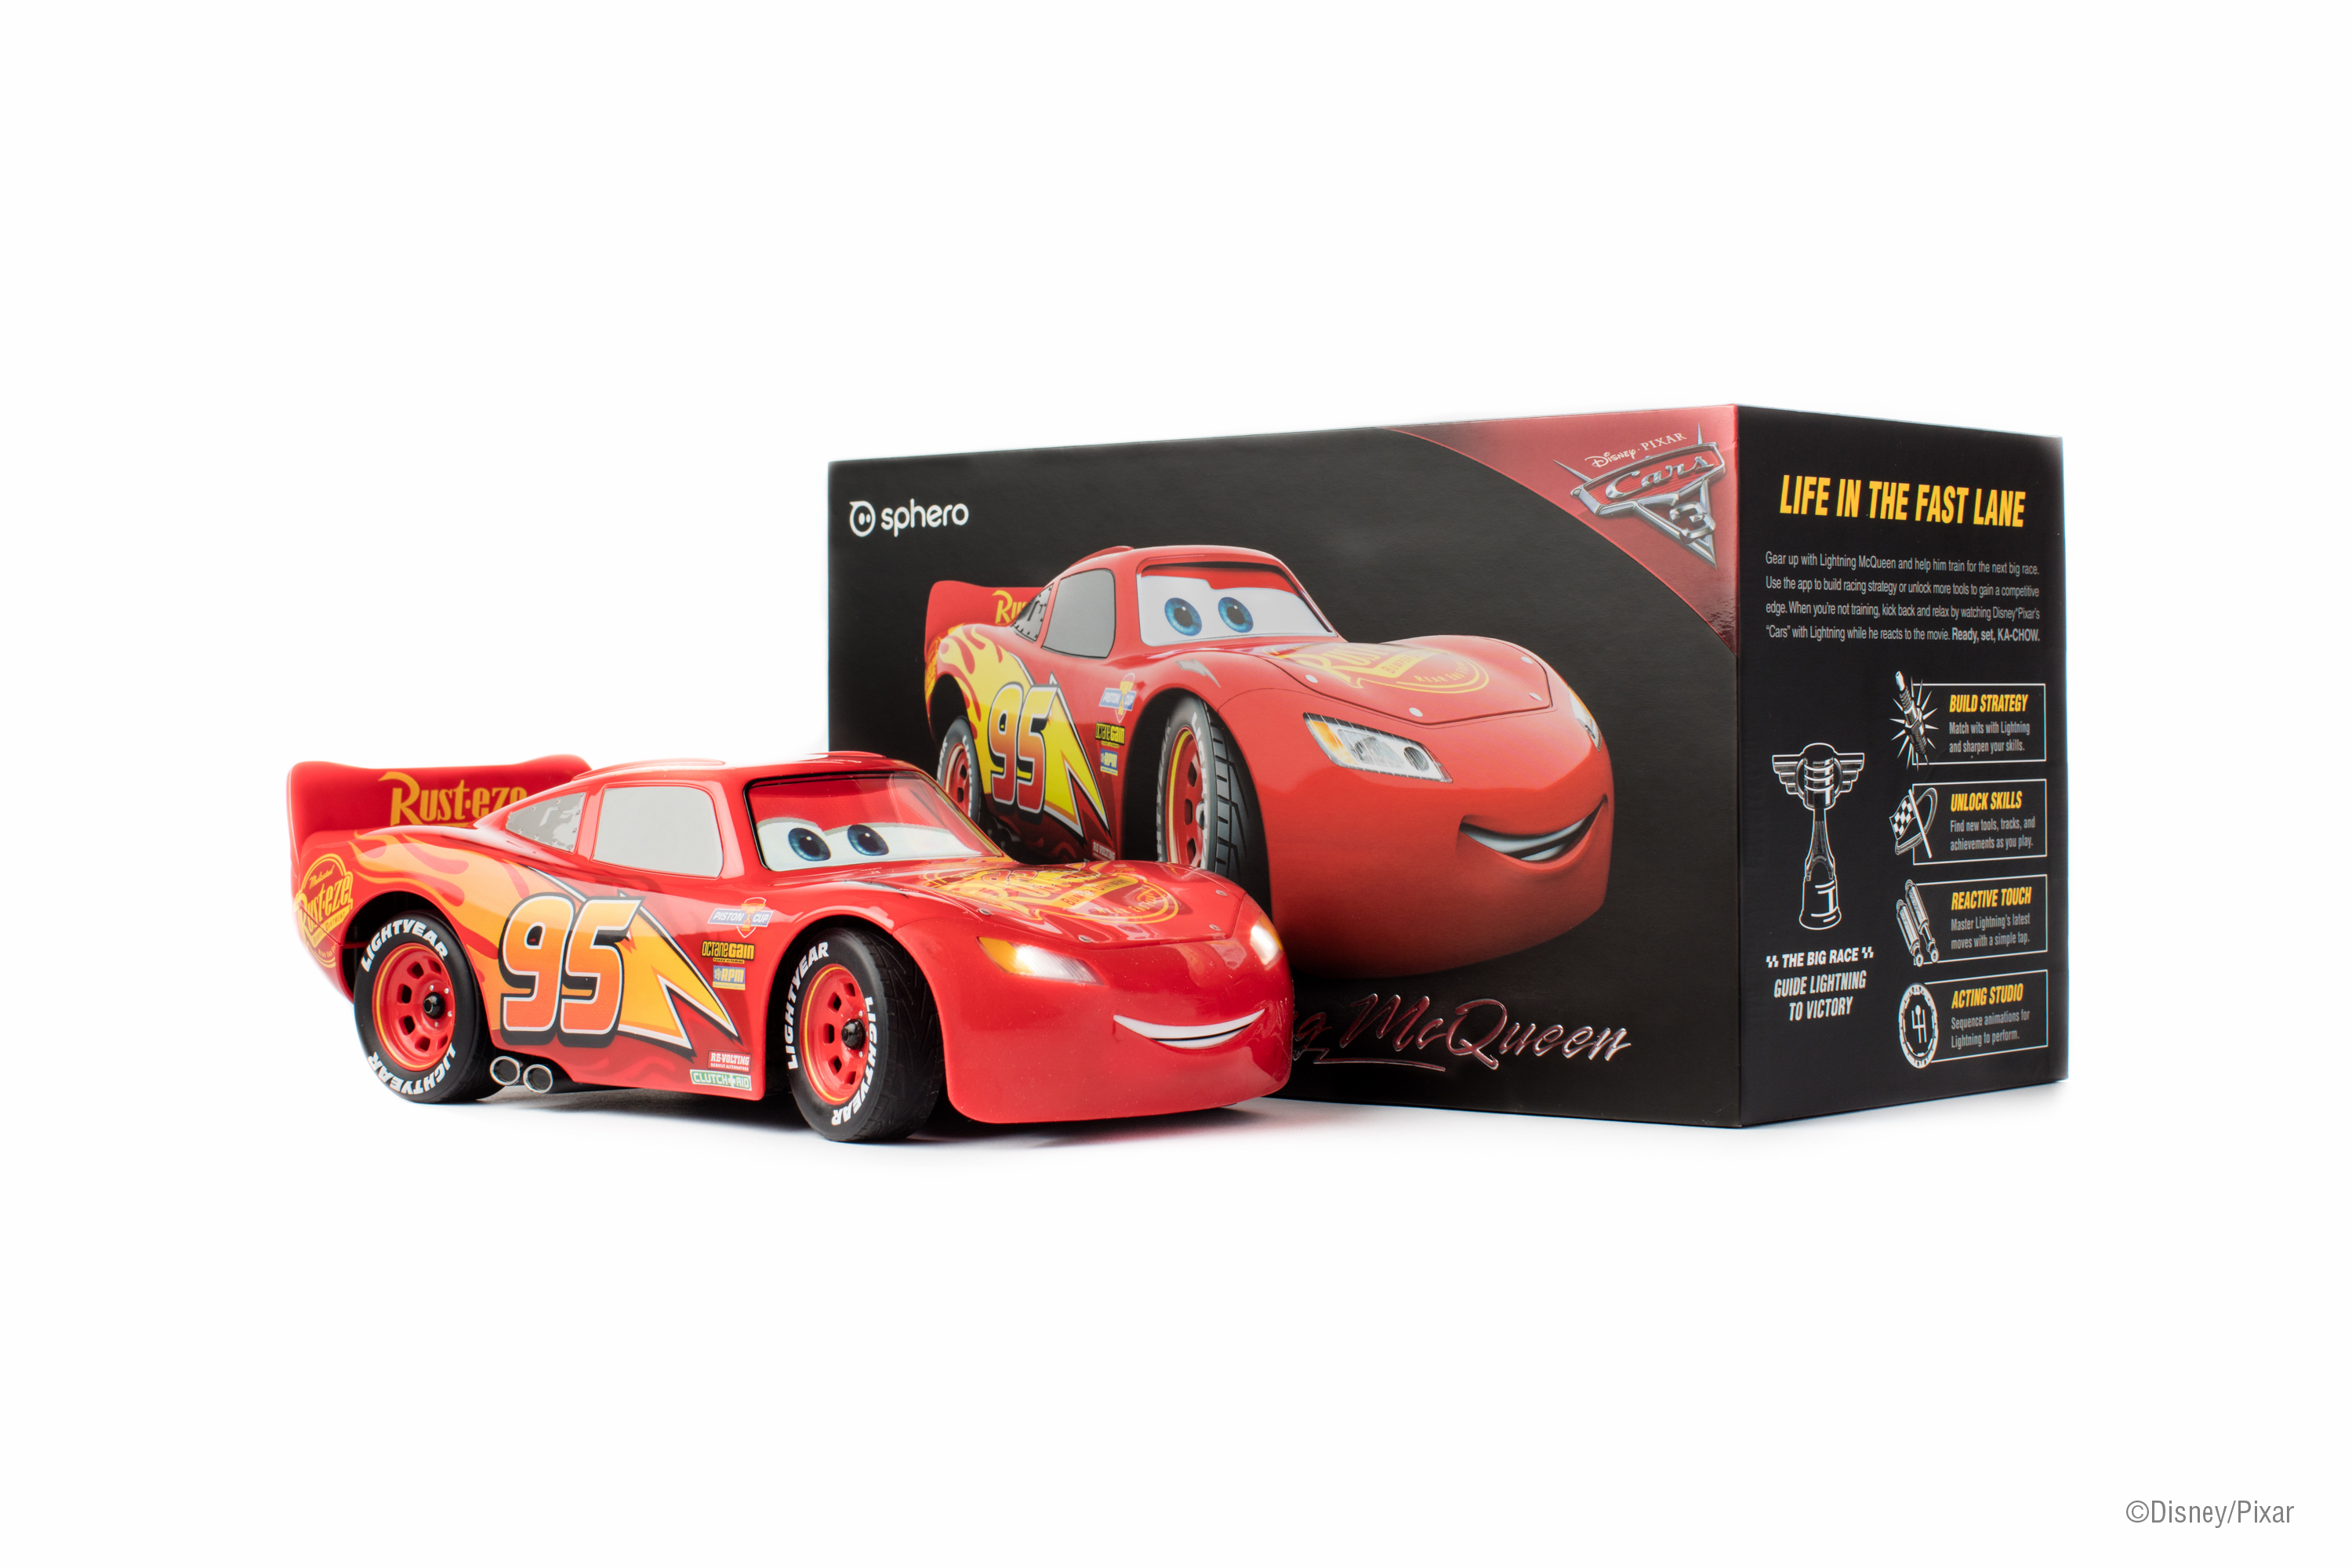 Artist builds Lightning McQueen from toy cars